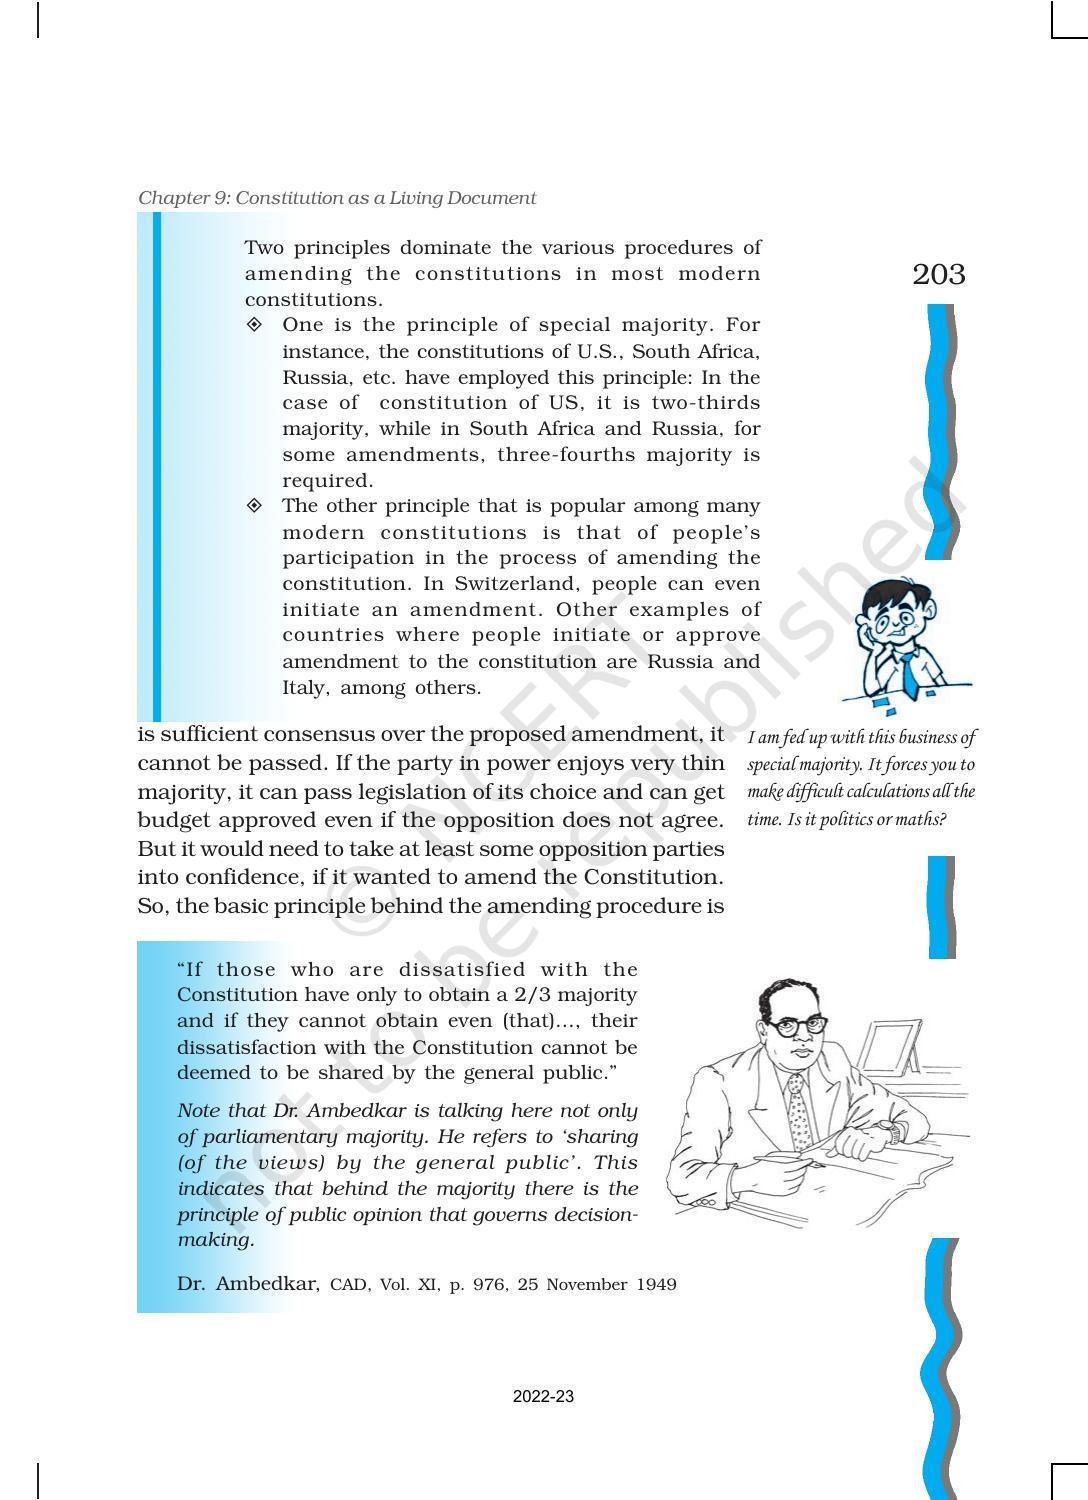 NCERT Book for Class 11 Political Science (Indian Constitution at Work) Chapter 9 Constitution as a Living Document - Page 8